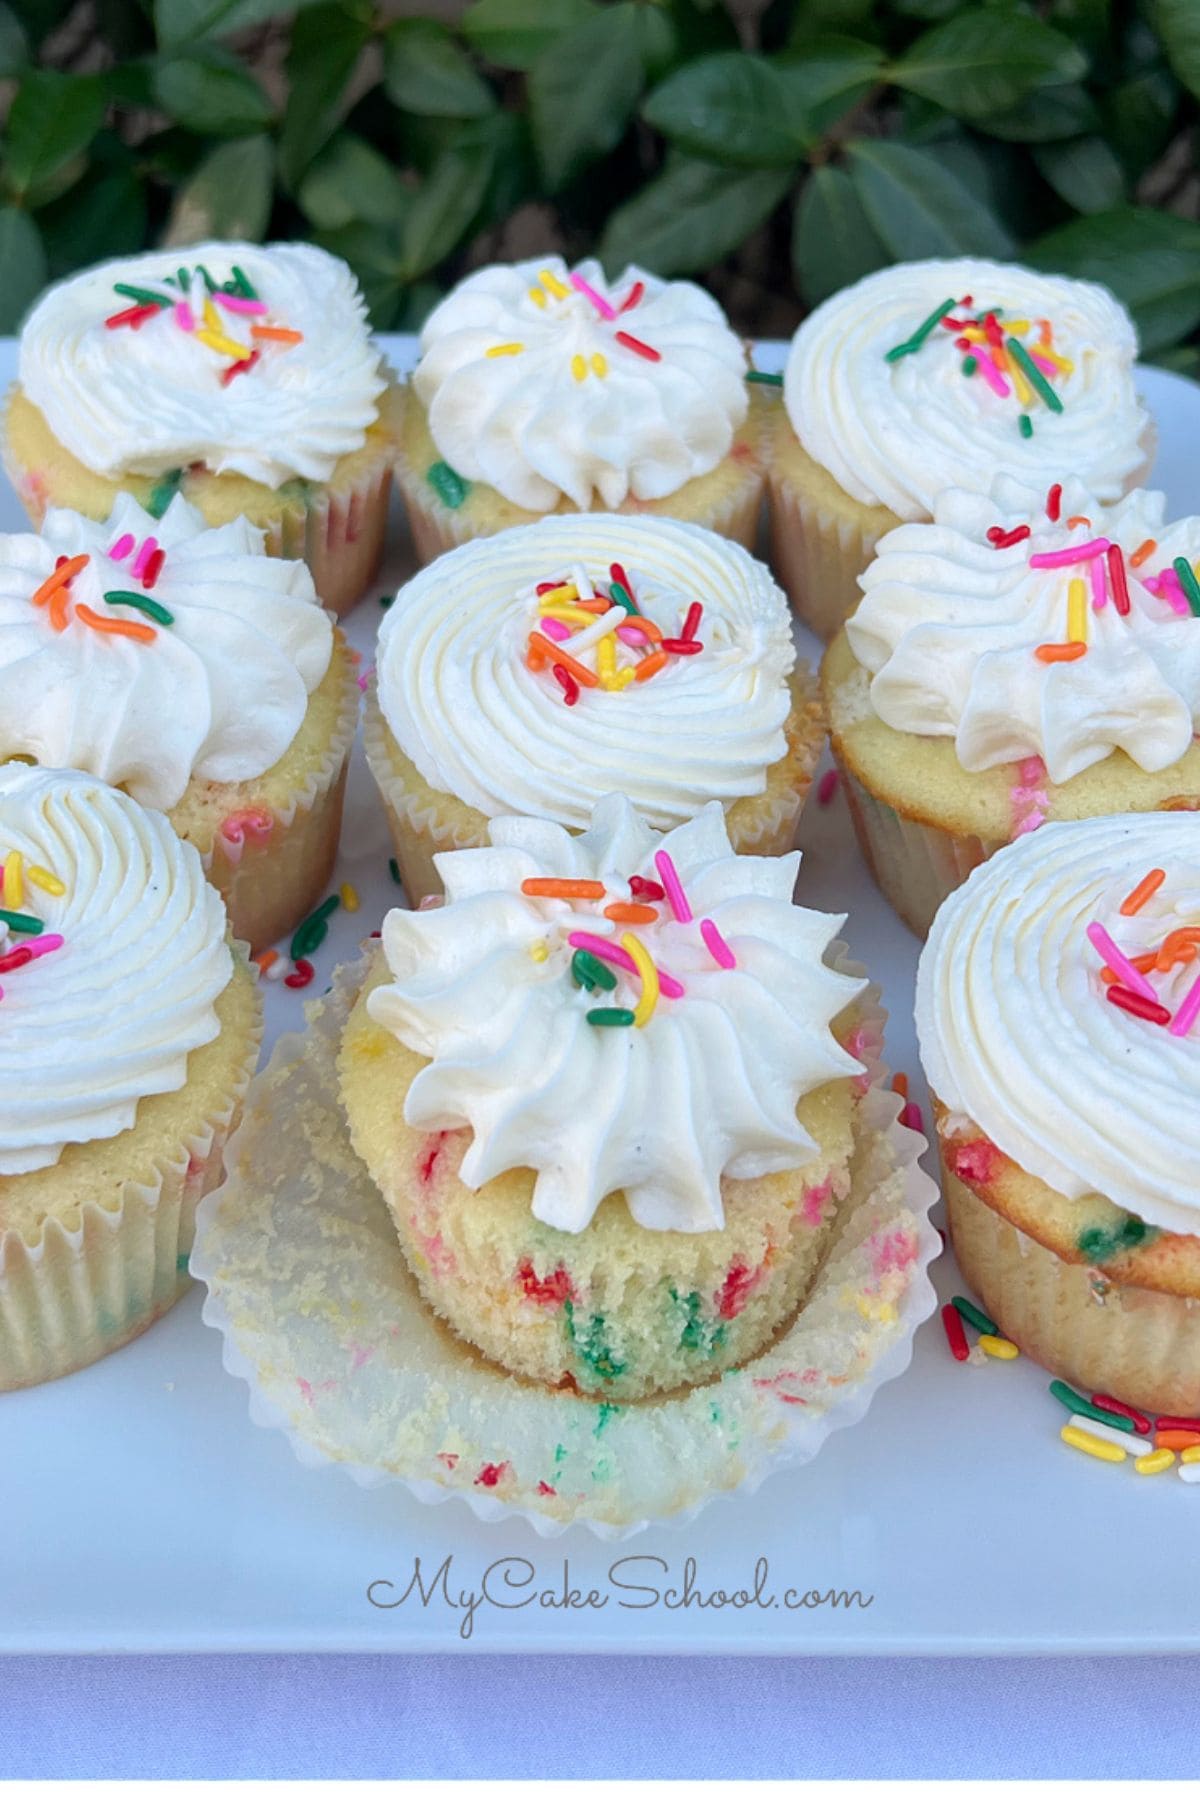 Funfetti Cupcakes from Scratch on a cake platter.